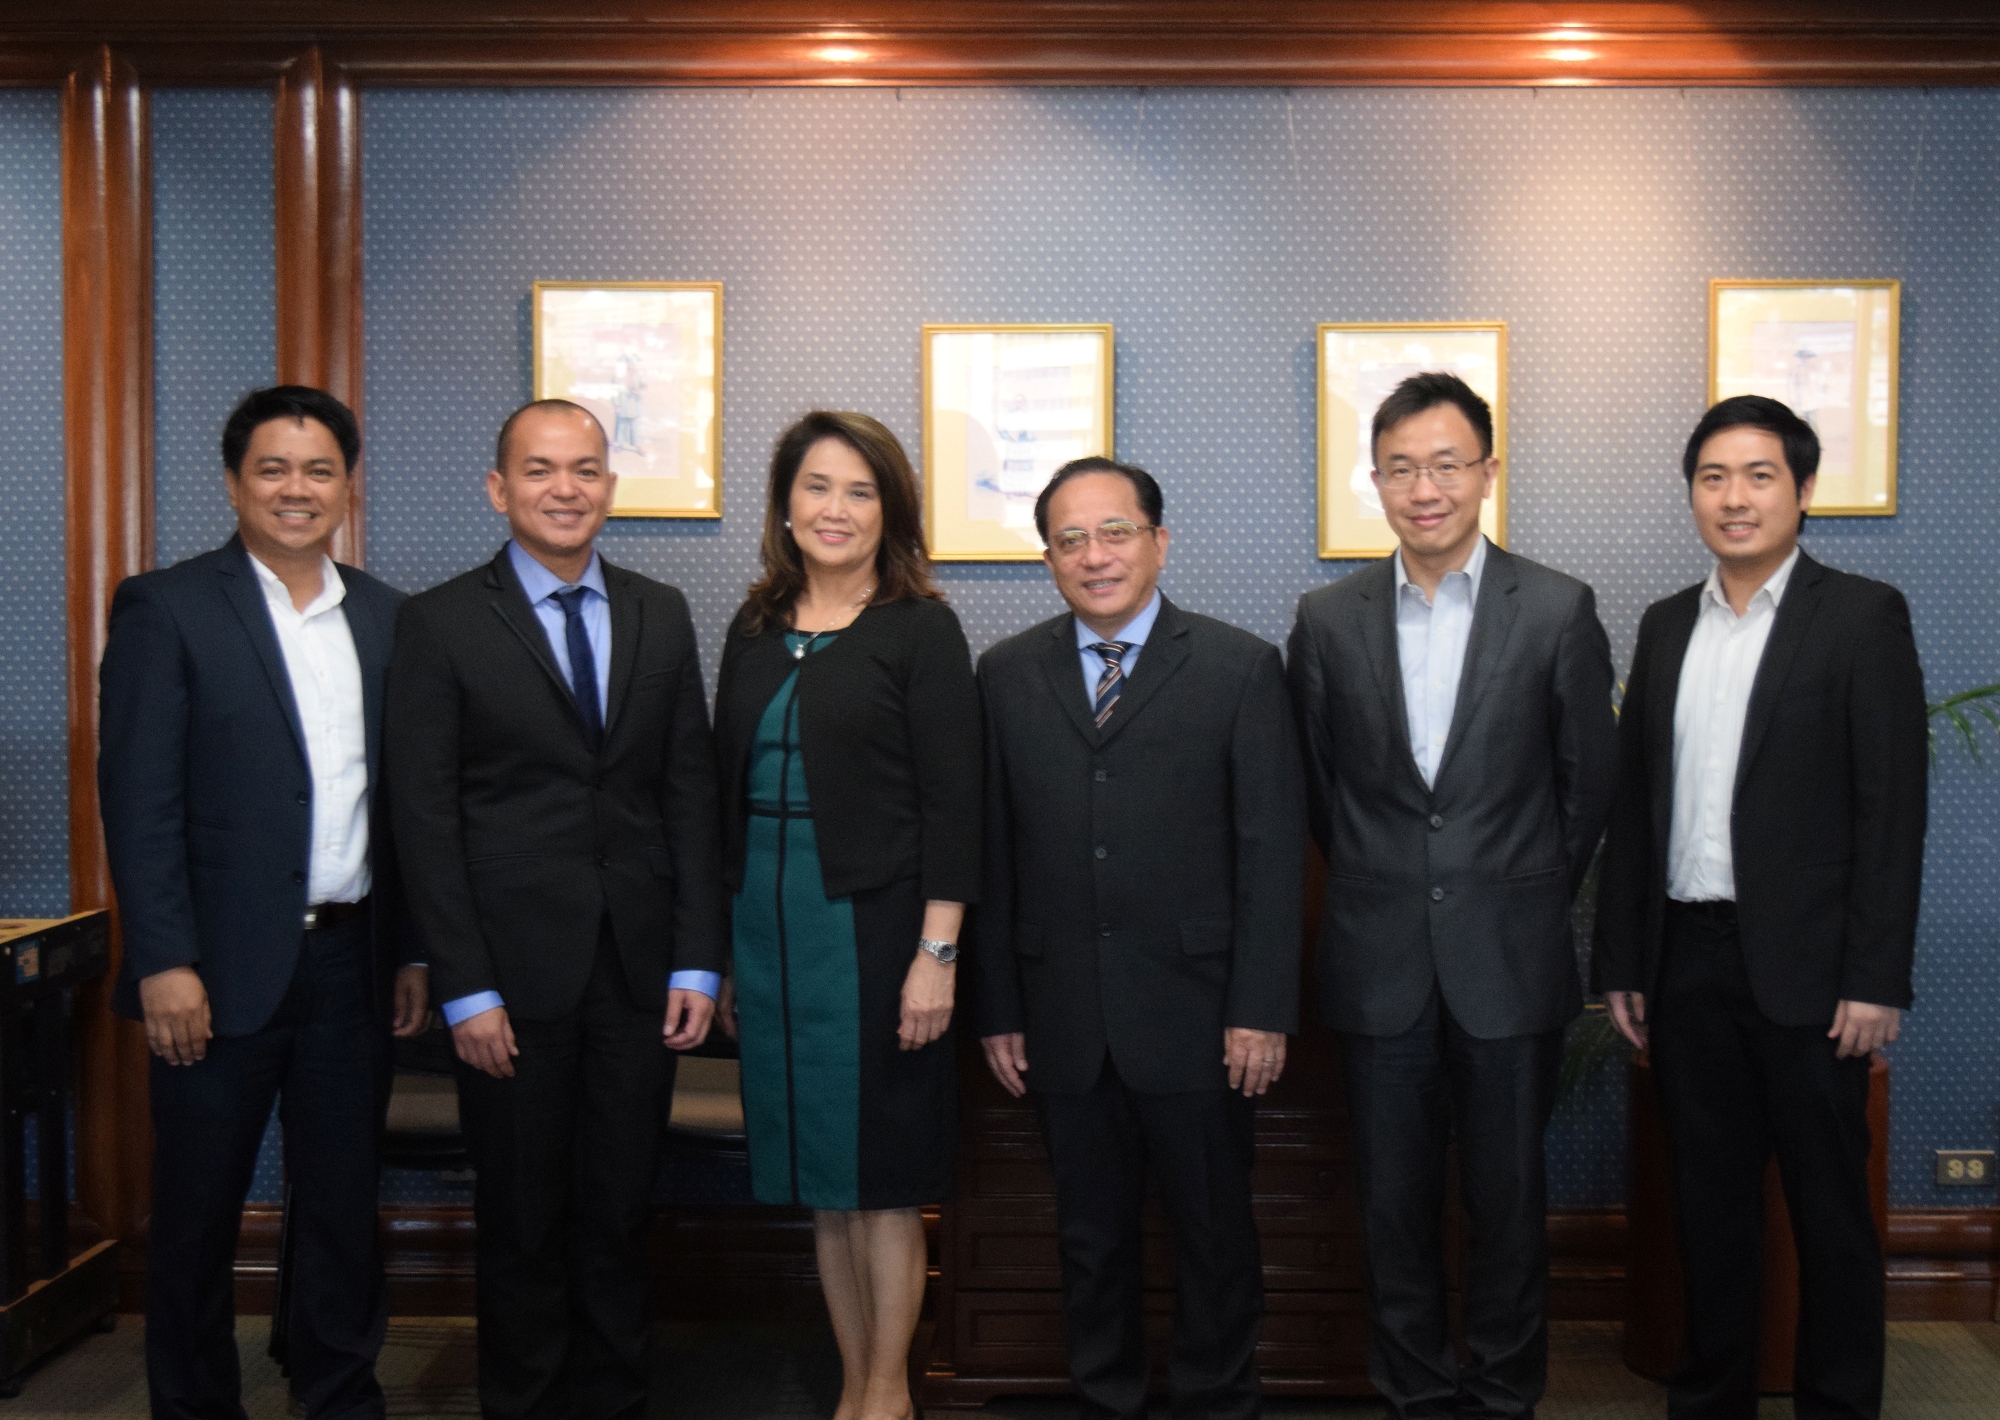 (From left) Mau San Andres, AsiaPay Associate Director; Christian Eugene Quiros, PNB Vice President for Credit Card Group;  Annie Umali, PNB Credit Card Business Head; Bernie Tocmo, PNB Executive Vice President and Head of Retail Banking Group; Joseph Chan, AsiaPay President and CEO and Vincent Jan Santiago, AsiaPay Regional Solution Manager. 